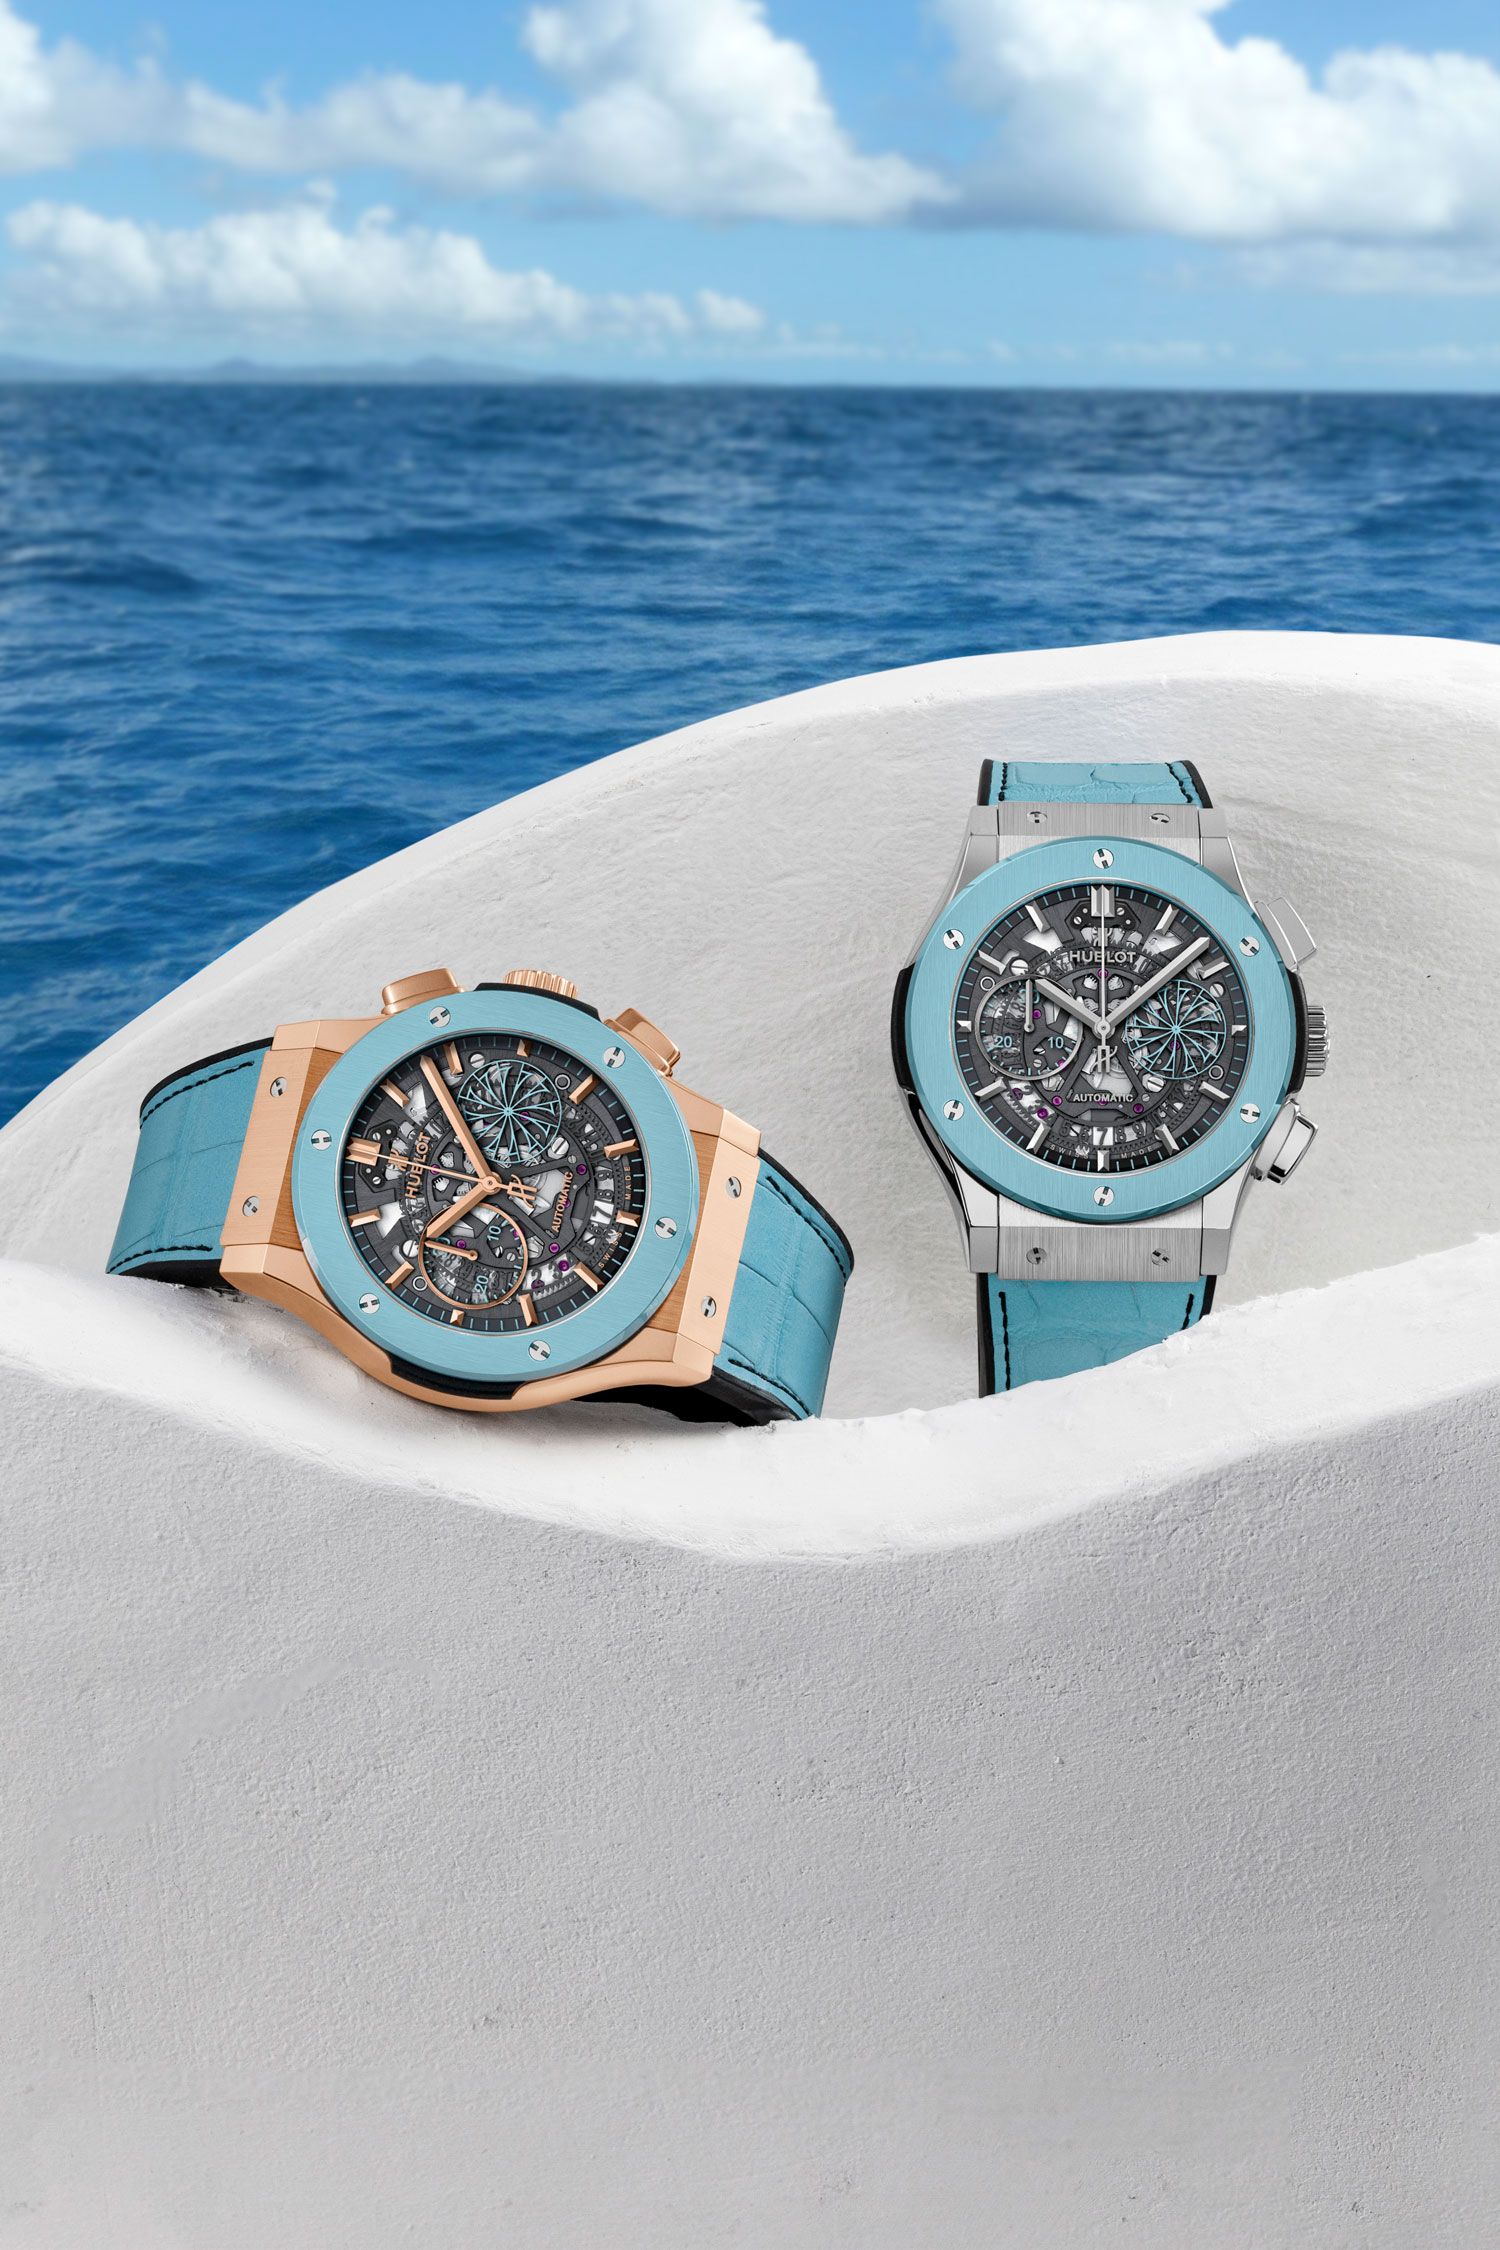 HUBLOT Loves Summer With The New Classic Fusion Mykonos And Ibiza